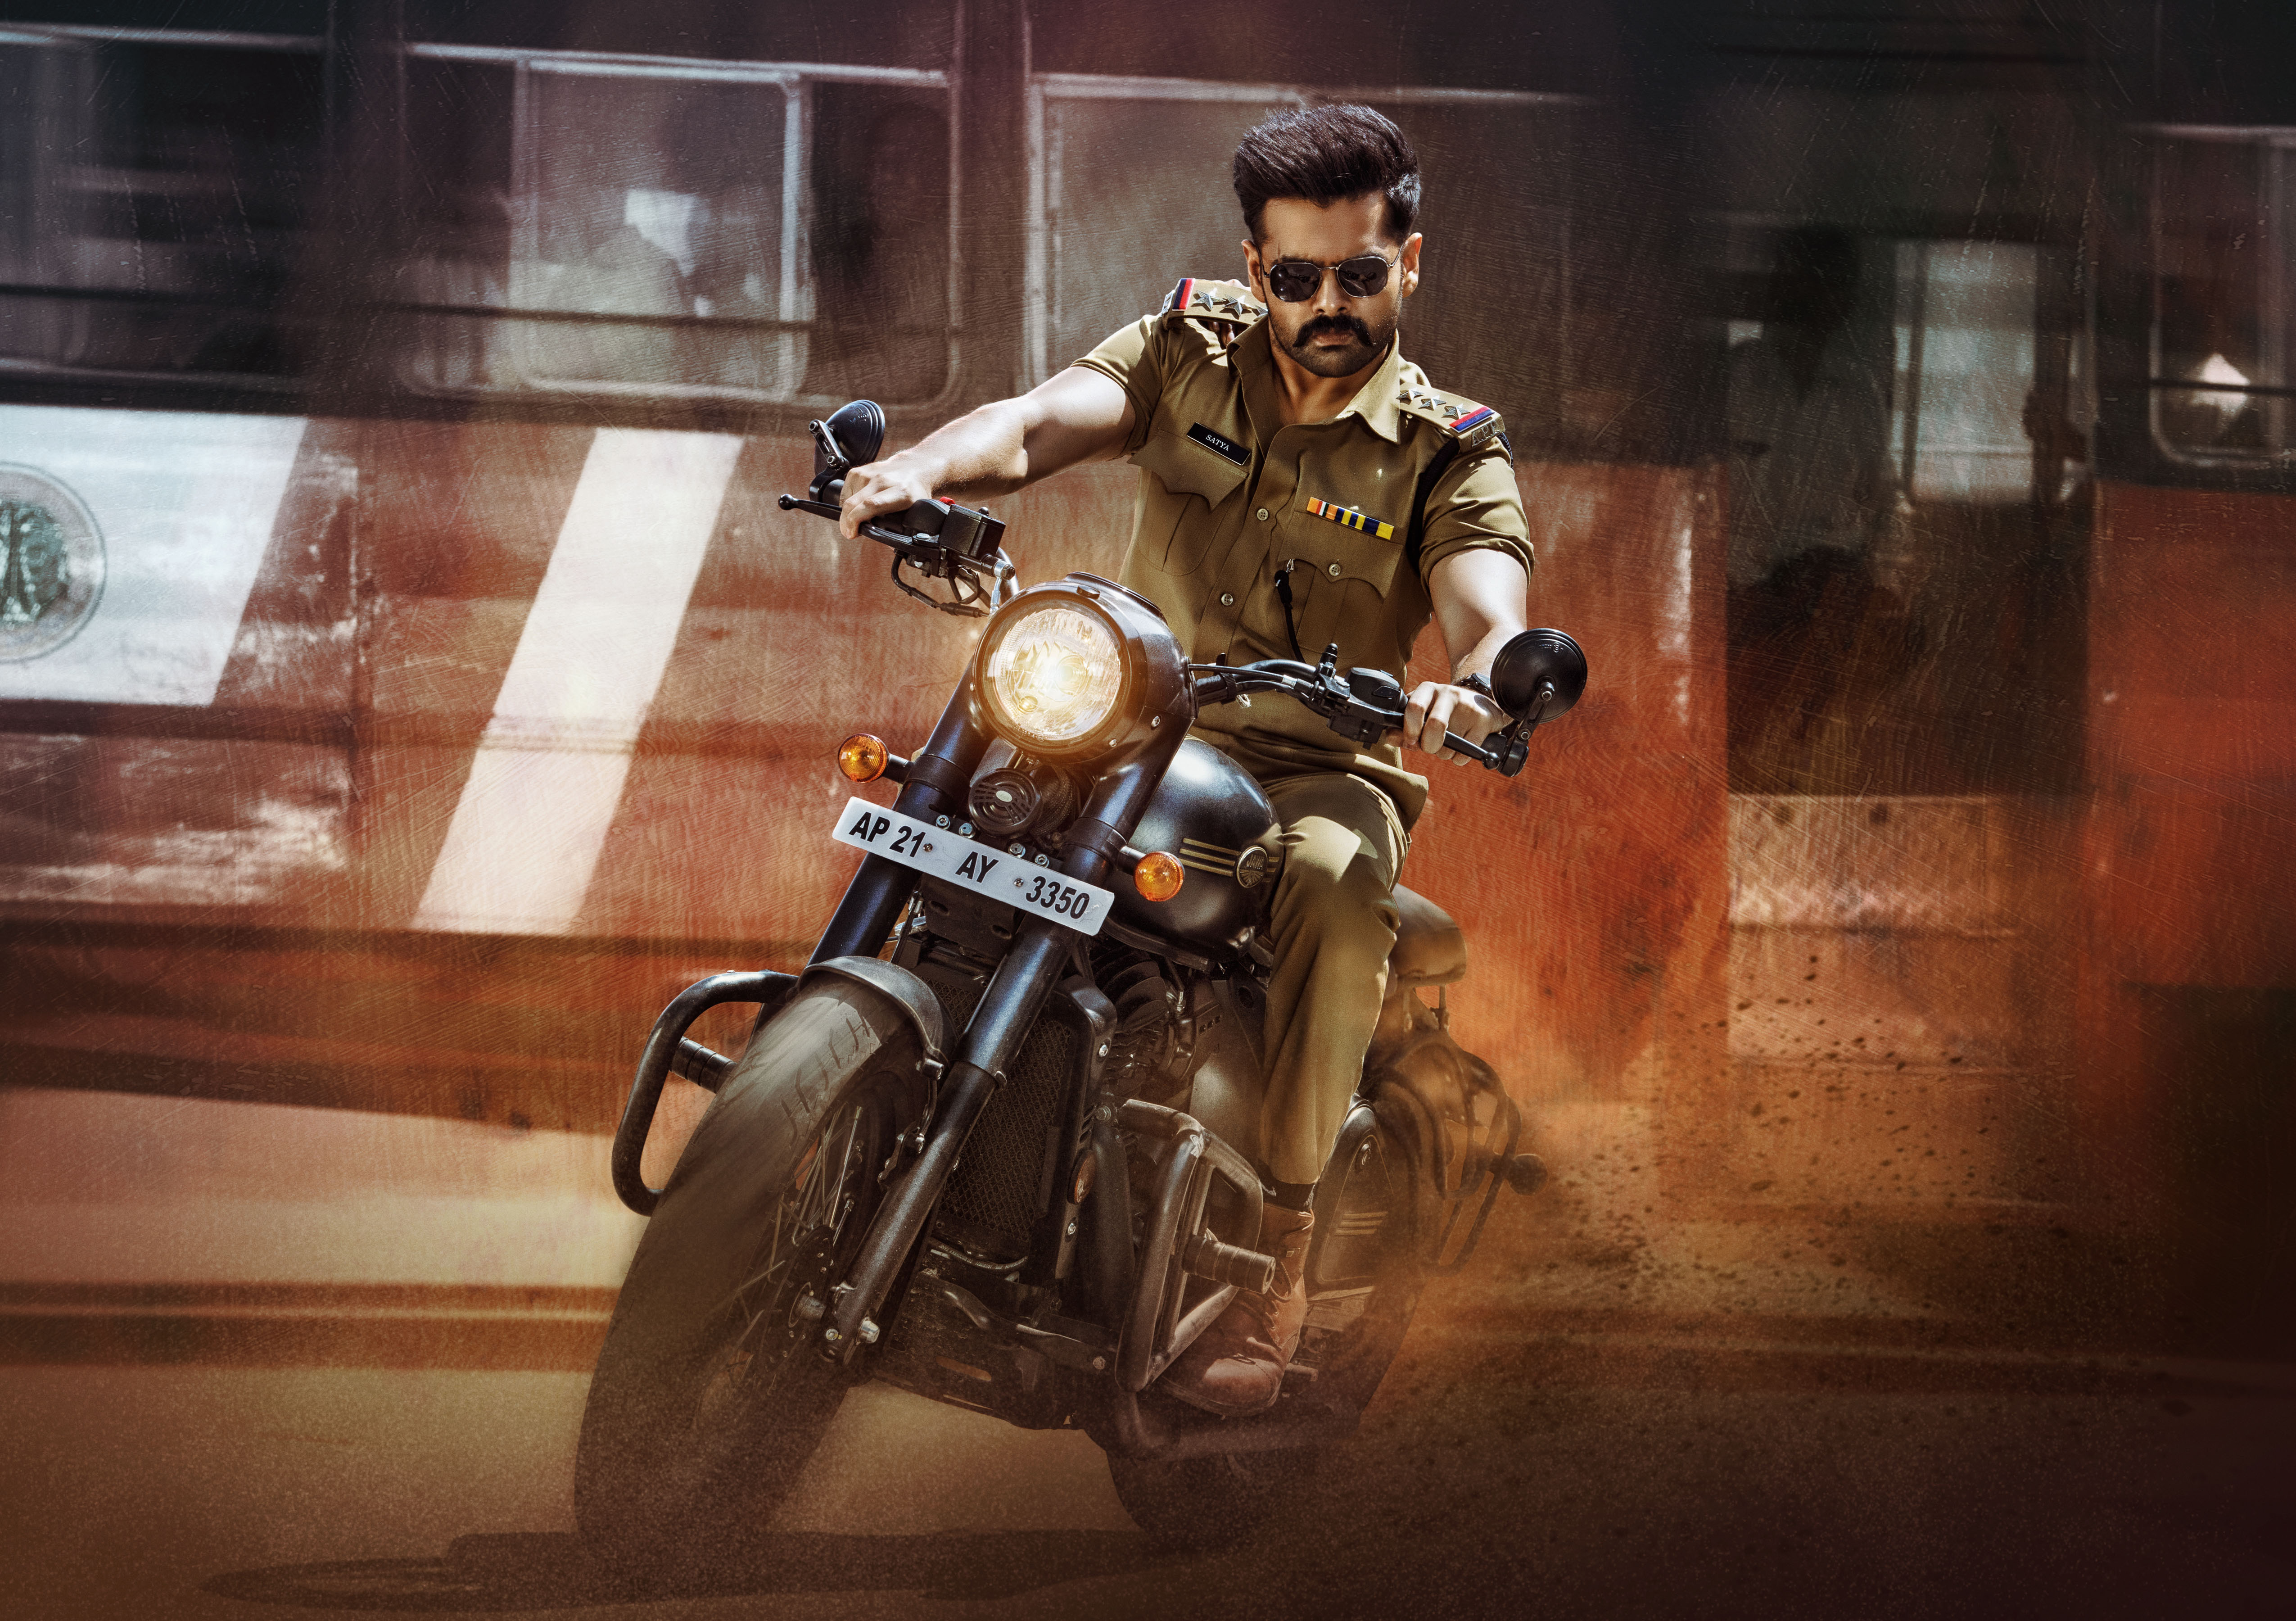 Ram Pothineni police look from The Warriorr unveiled